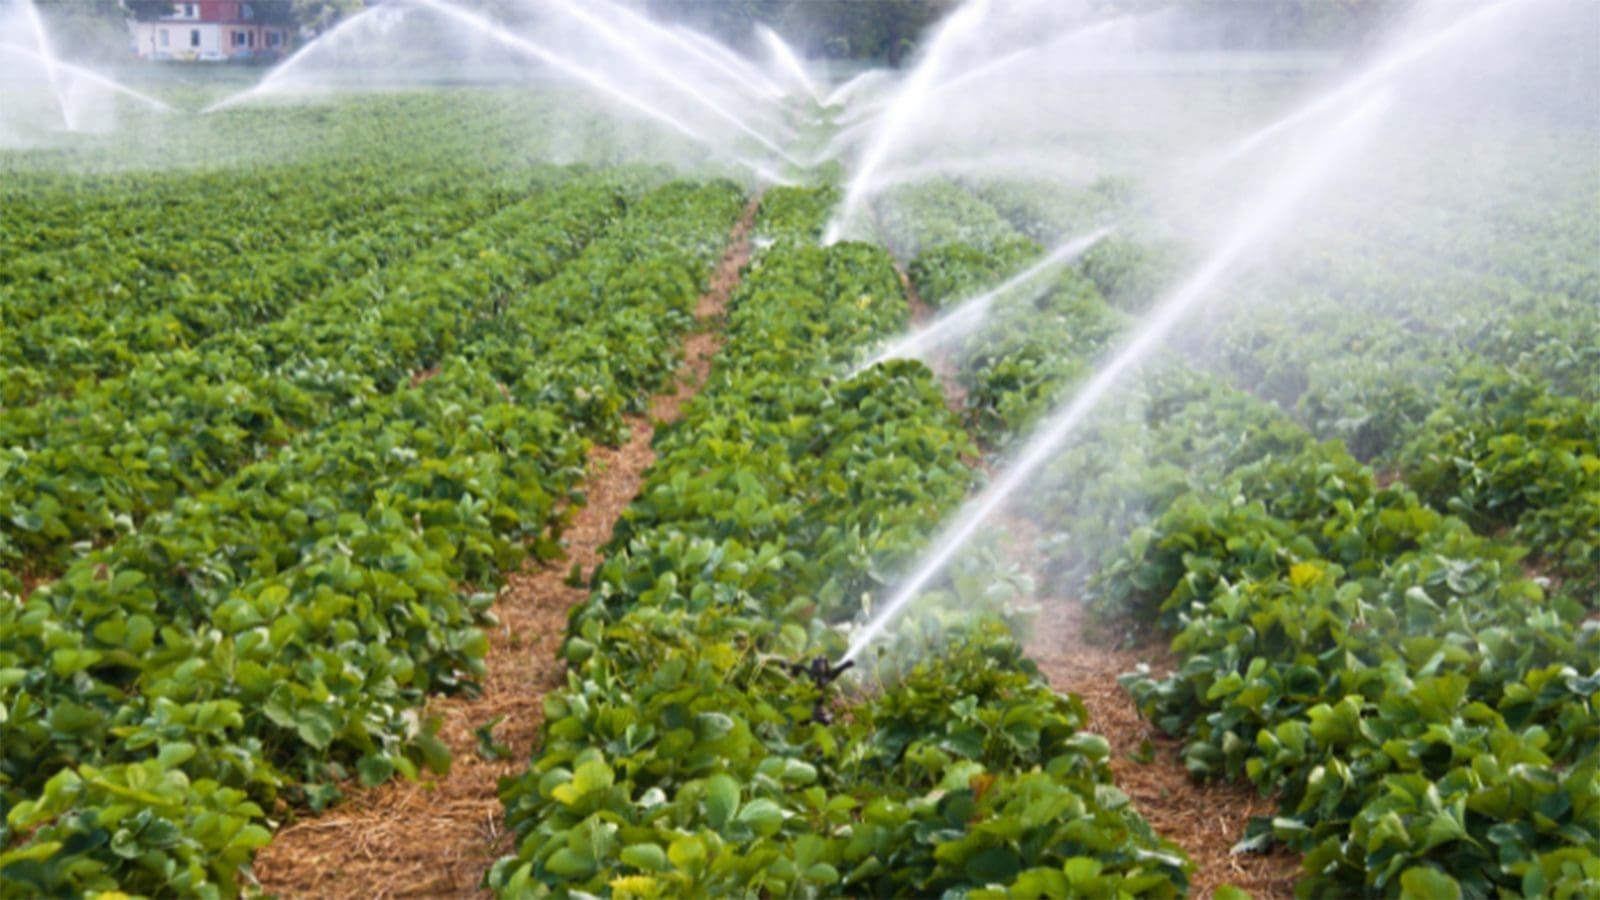 FDA launches new online tool to familiarize farmers with proposed rule on agricultural water